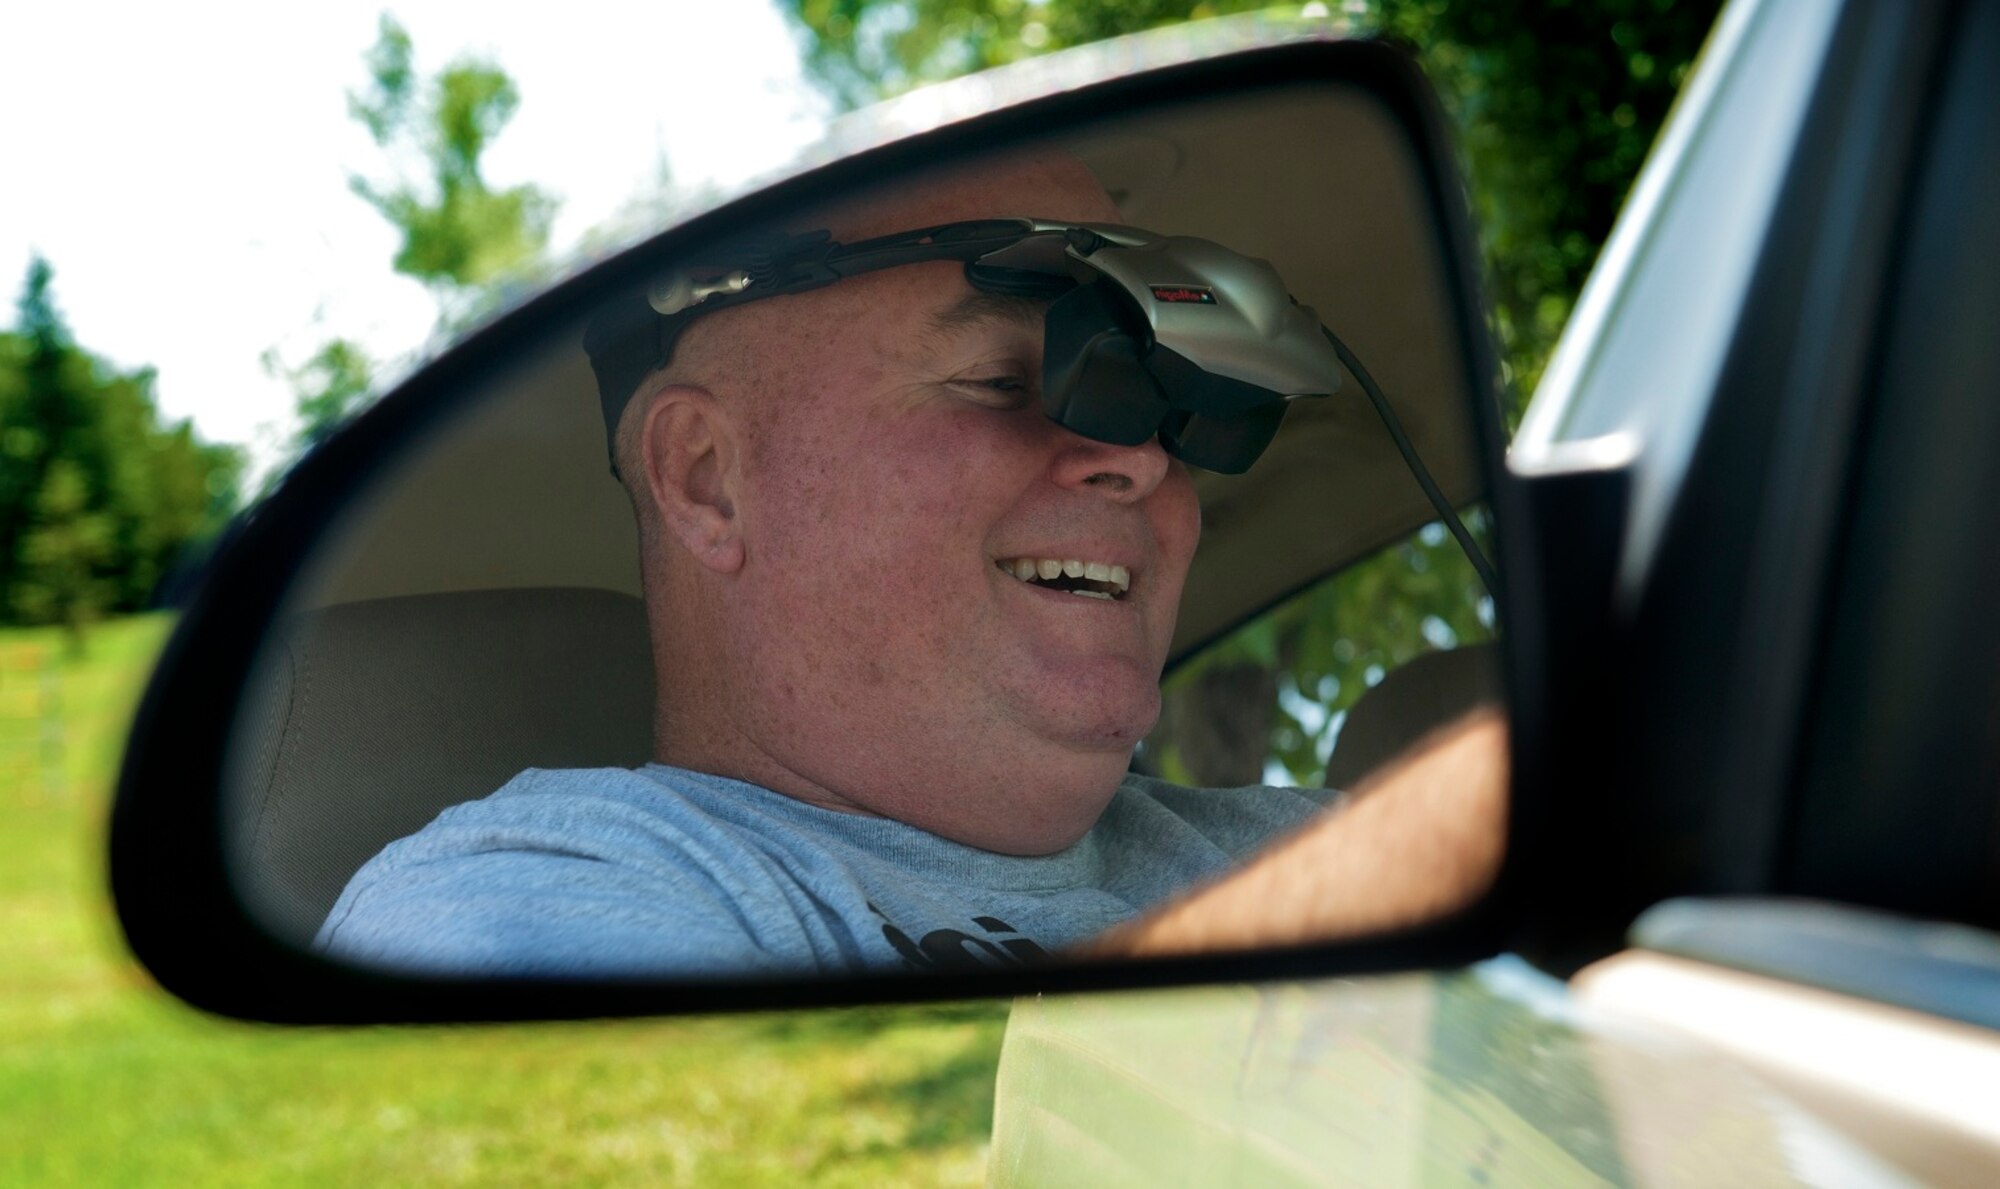 Col. William Tyra, 5th Medical Group commander, participates in an impaired driving simulation during a 5th MDG picnic, Aug. 16. The simulator will be distributed to all the squadrons on base throughout the next month to raise awareness about the risks of driving while impaired. (U.S. Air Force photo/Airman 1st Class Apryl Hall)